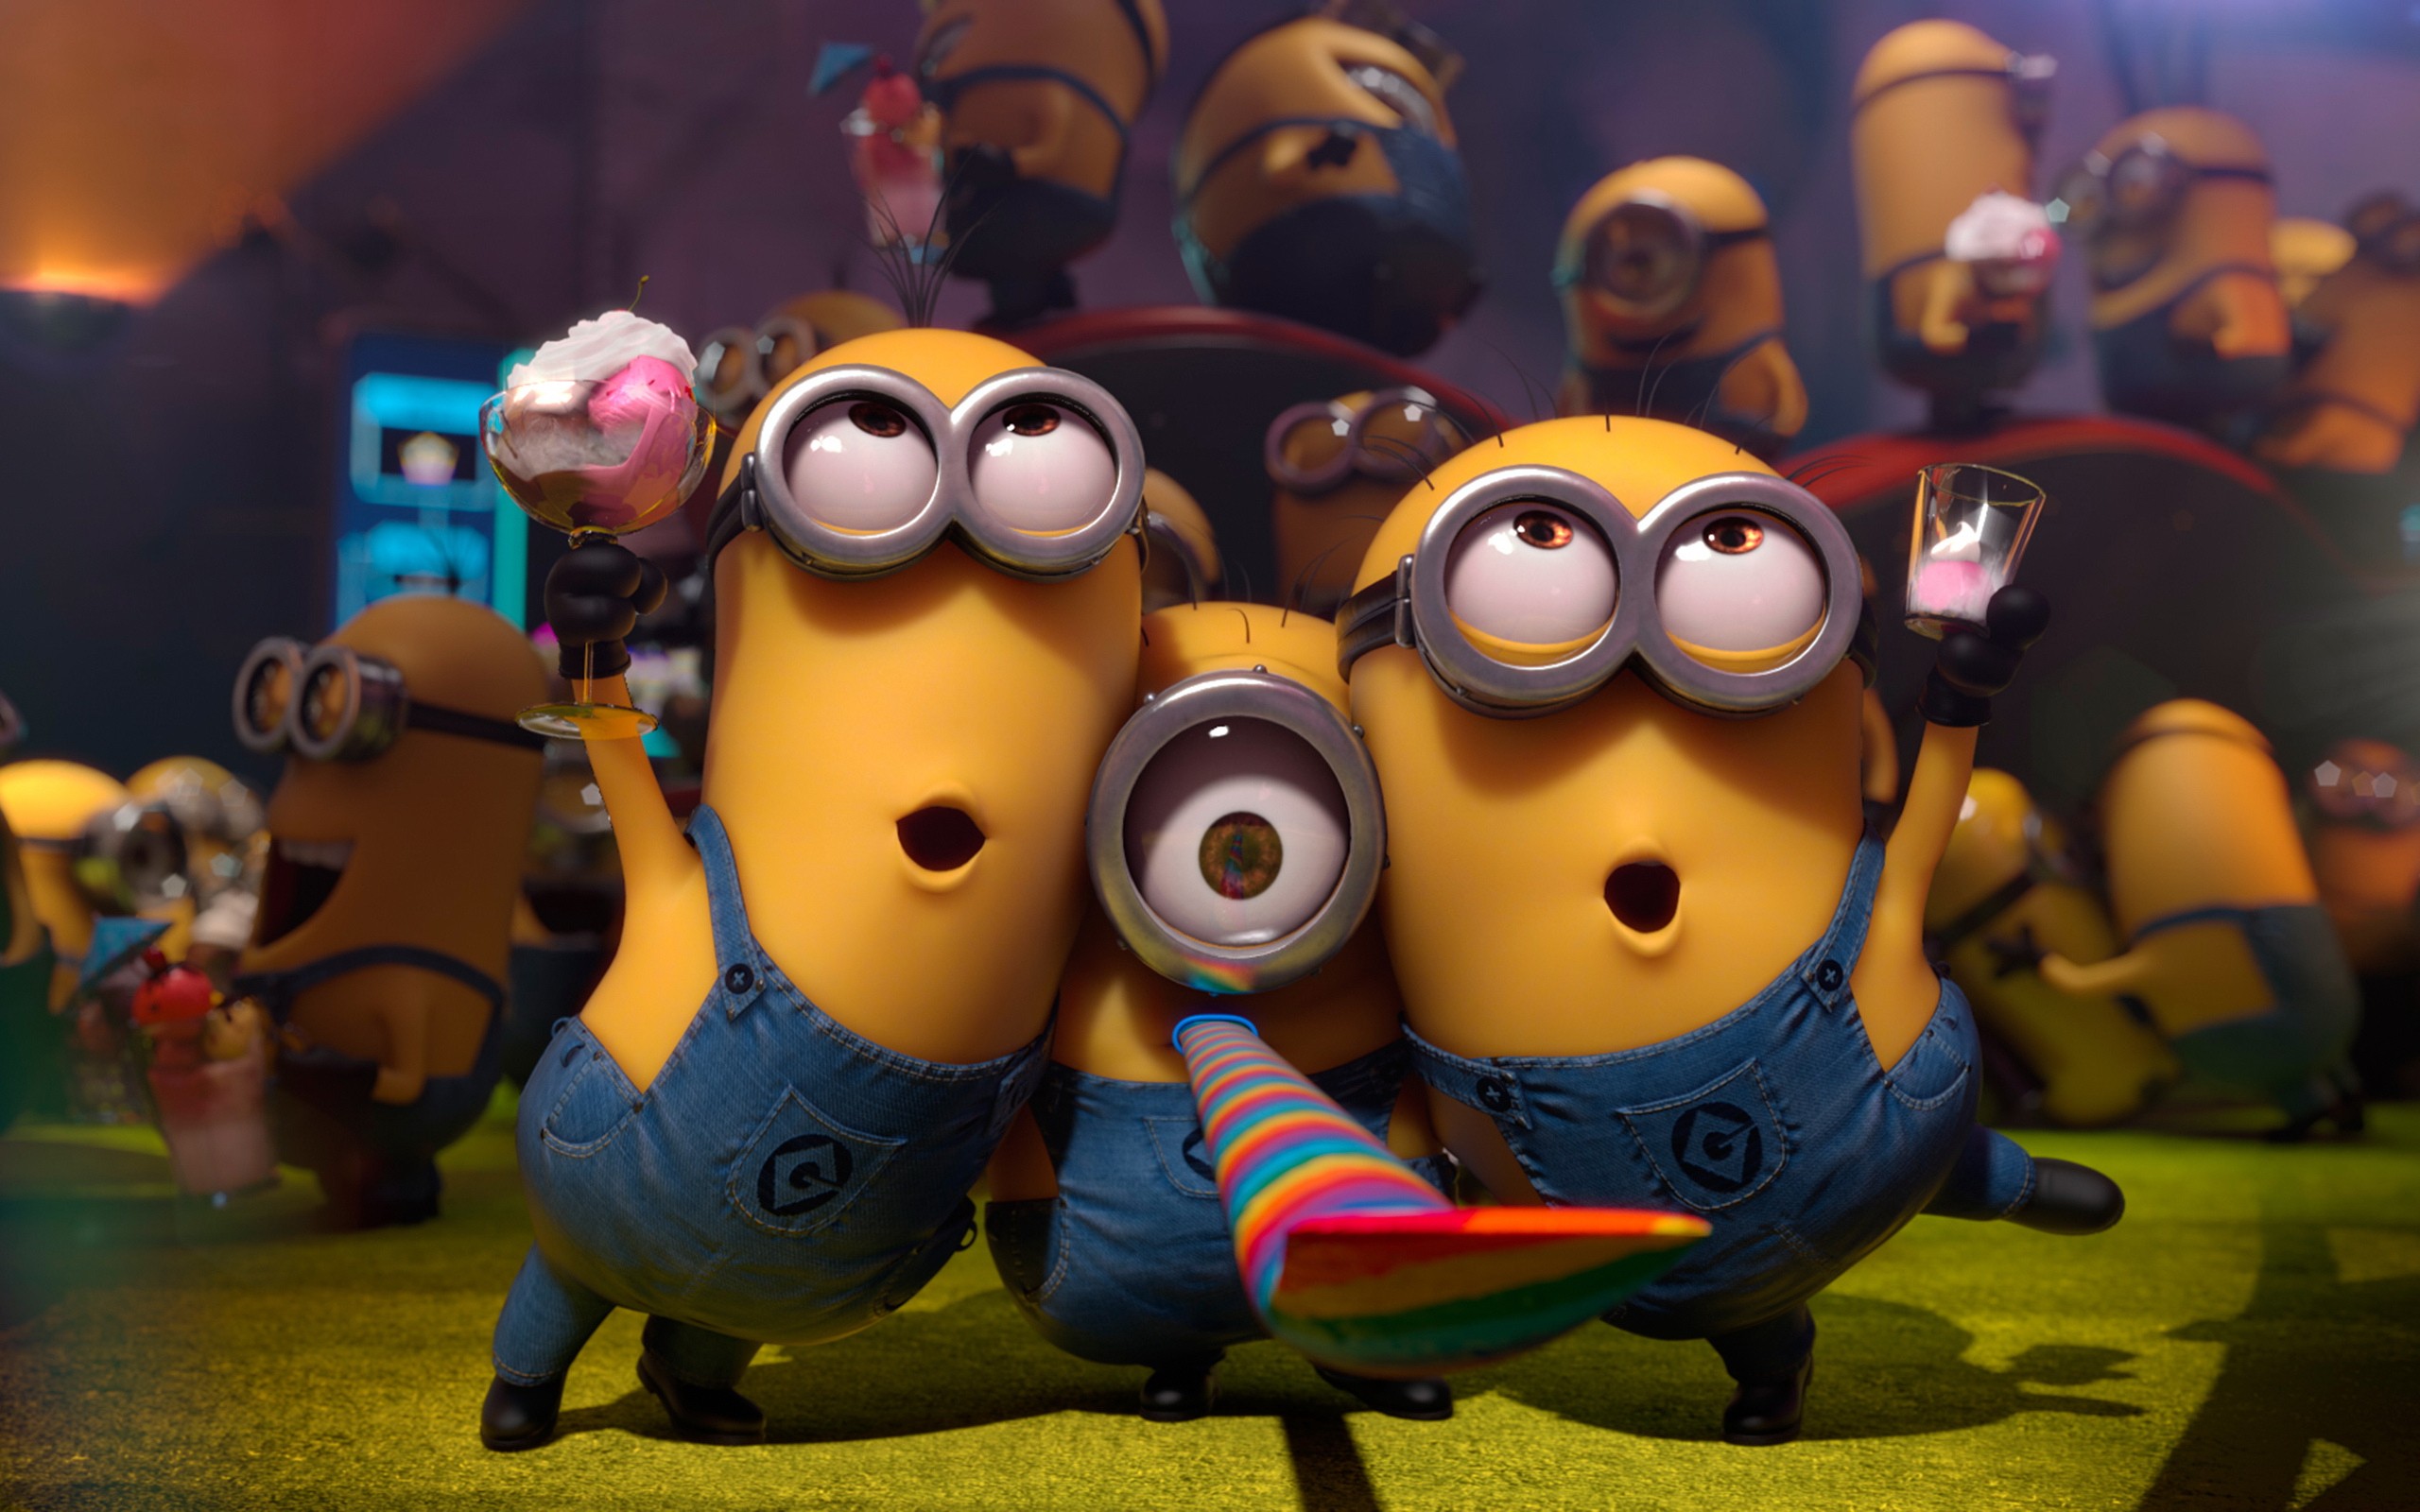 General 2560x1600 Despicable Me movies CGI minions animated movies